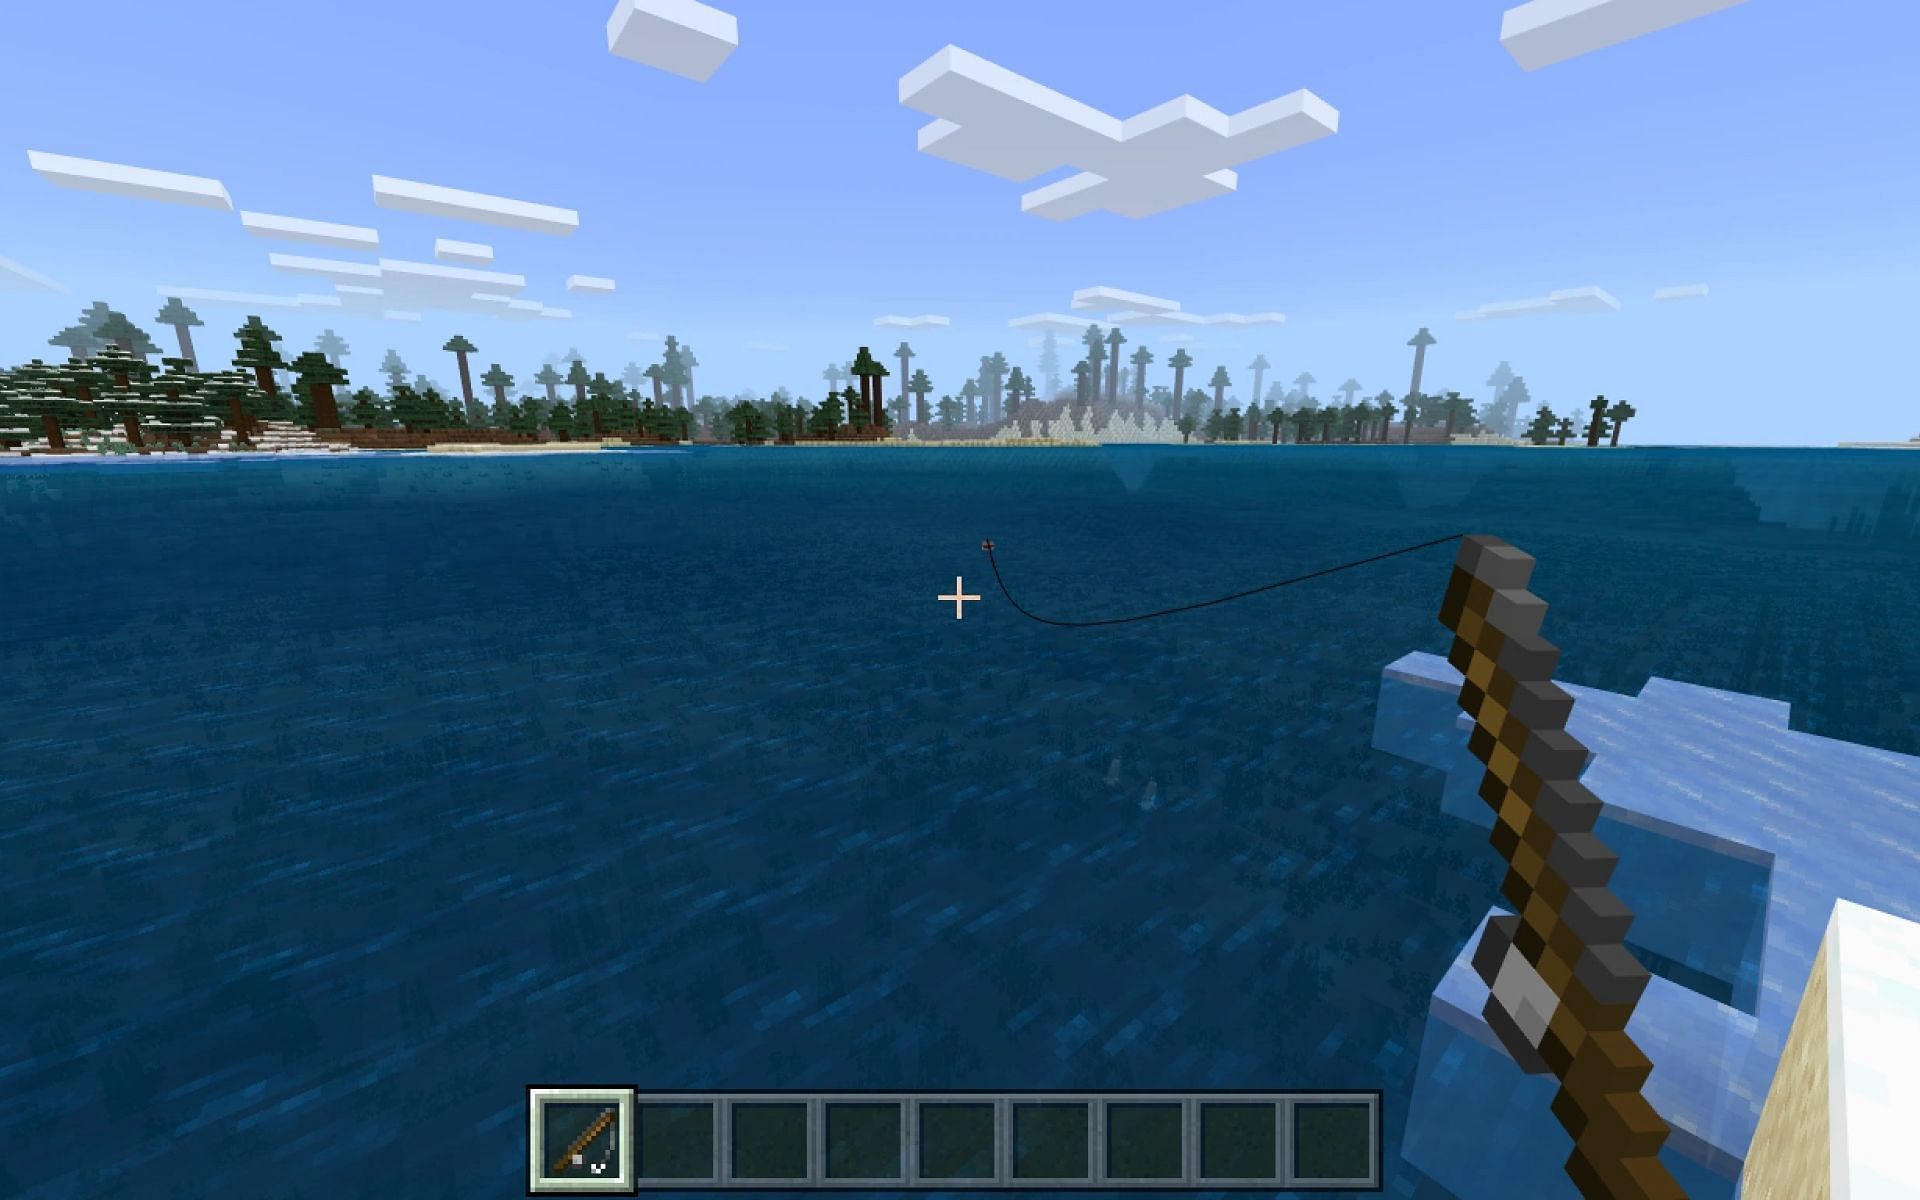 A player fishes in-game. Image via Minecraft.